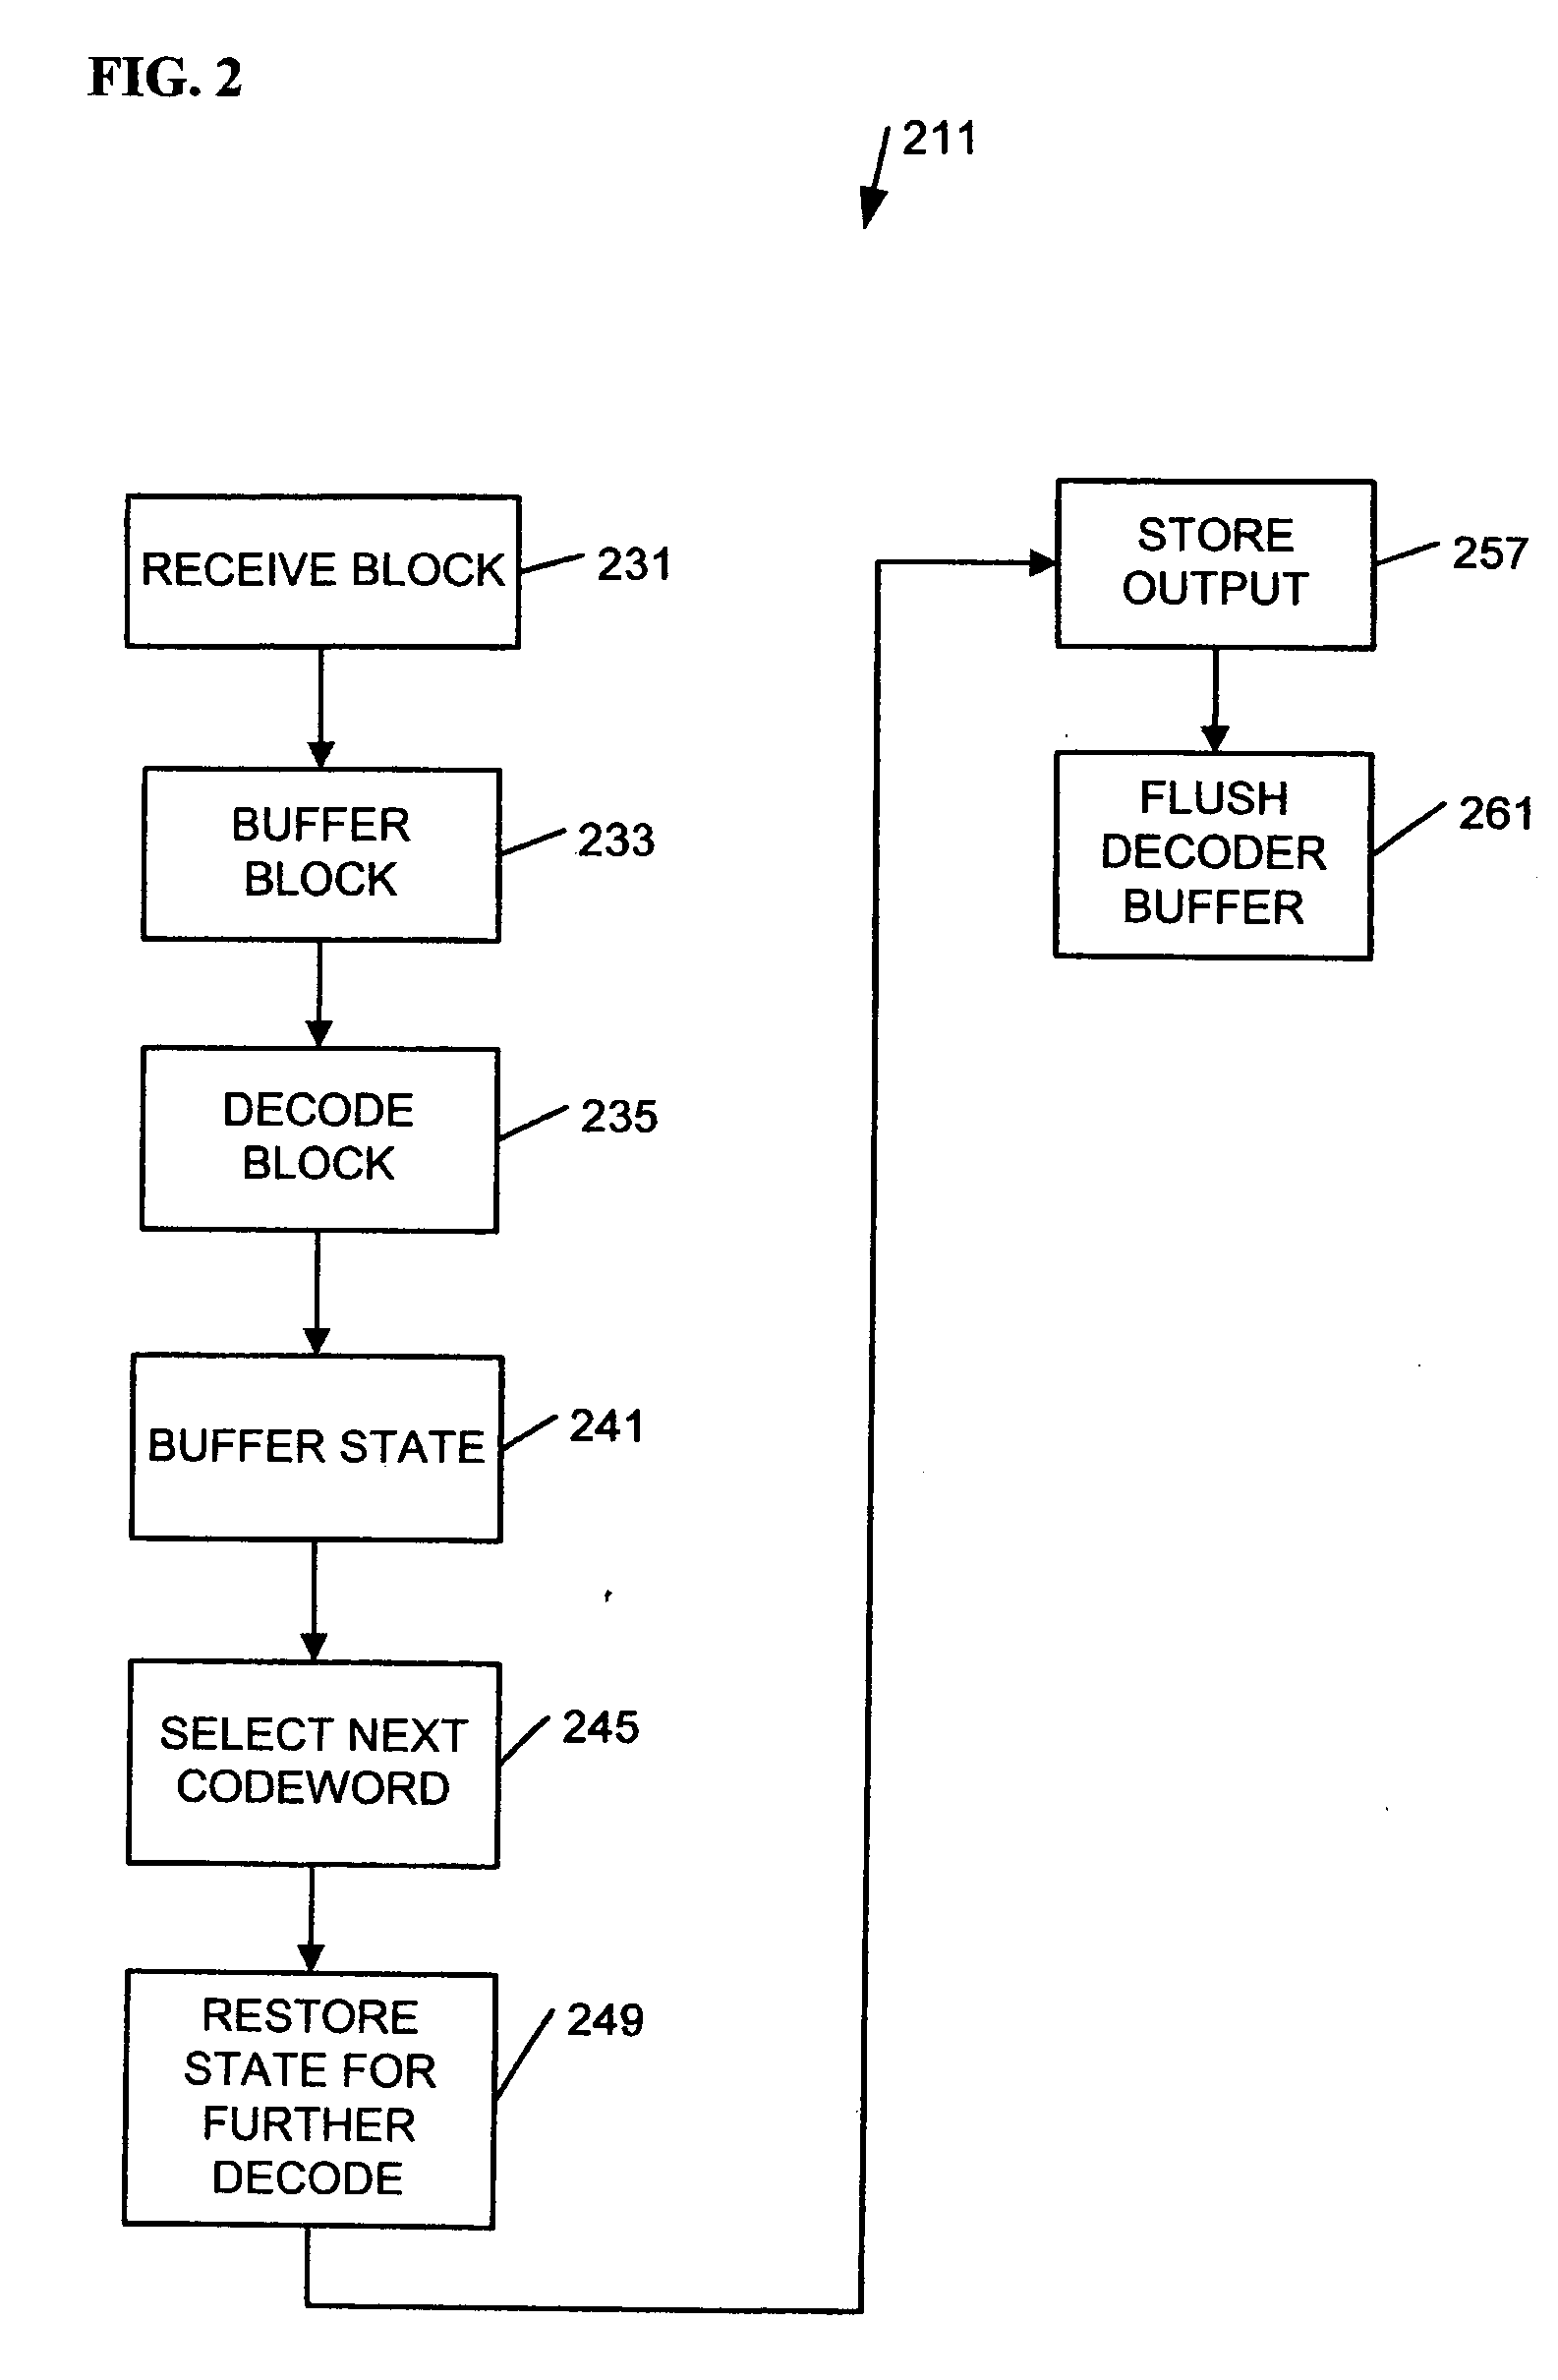 Cycle-stealing decoding apparatus, systems, and methods